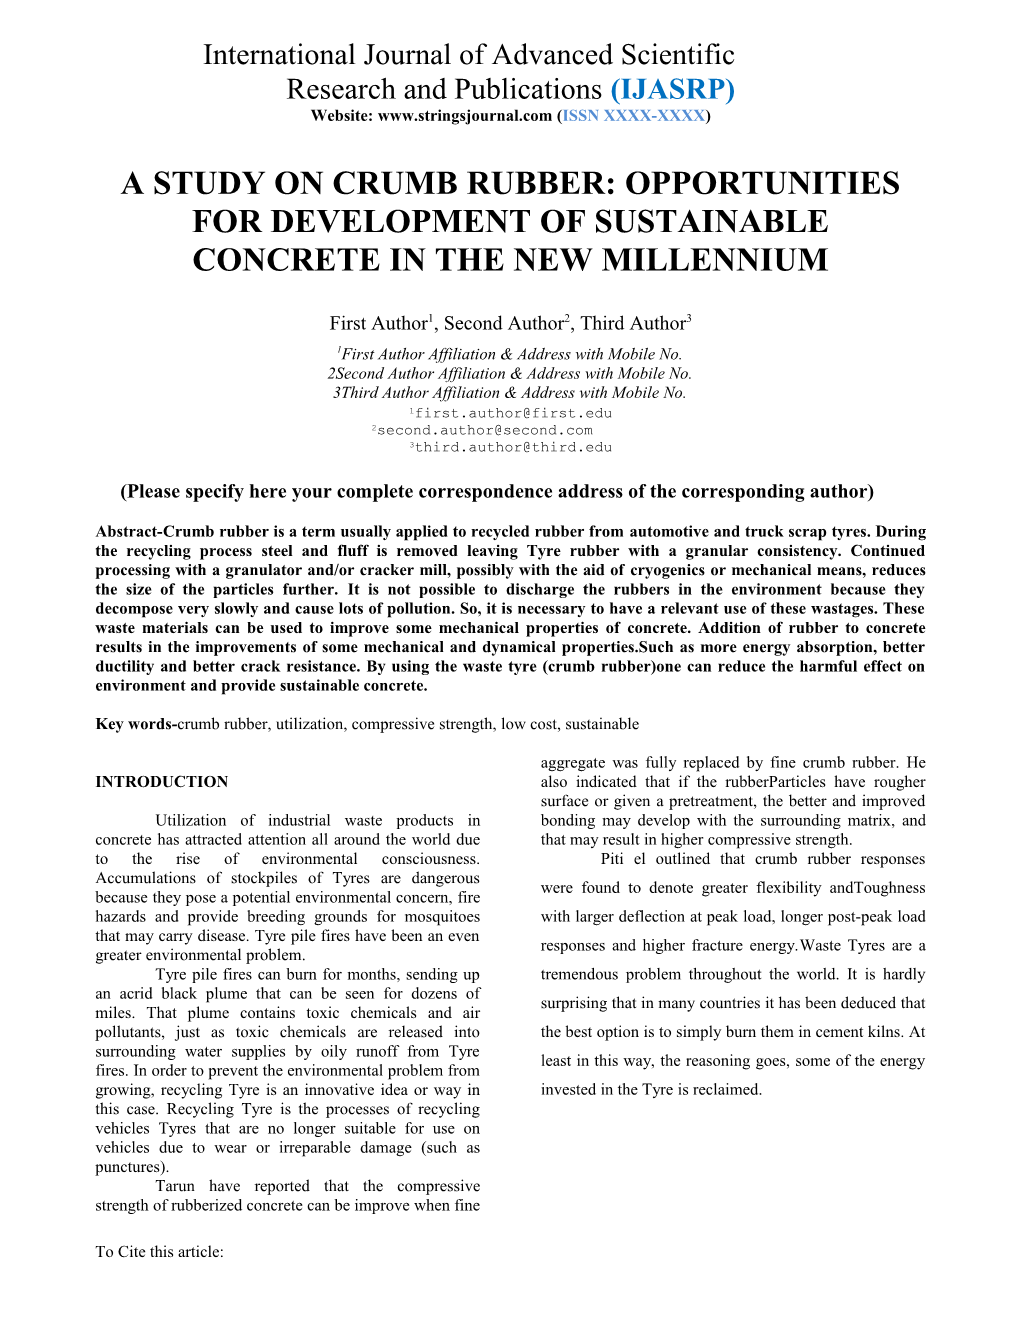 A Study on Crumb Rubber: Opportunities for Development of Sustainable Concrete in The